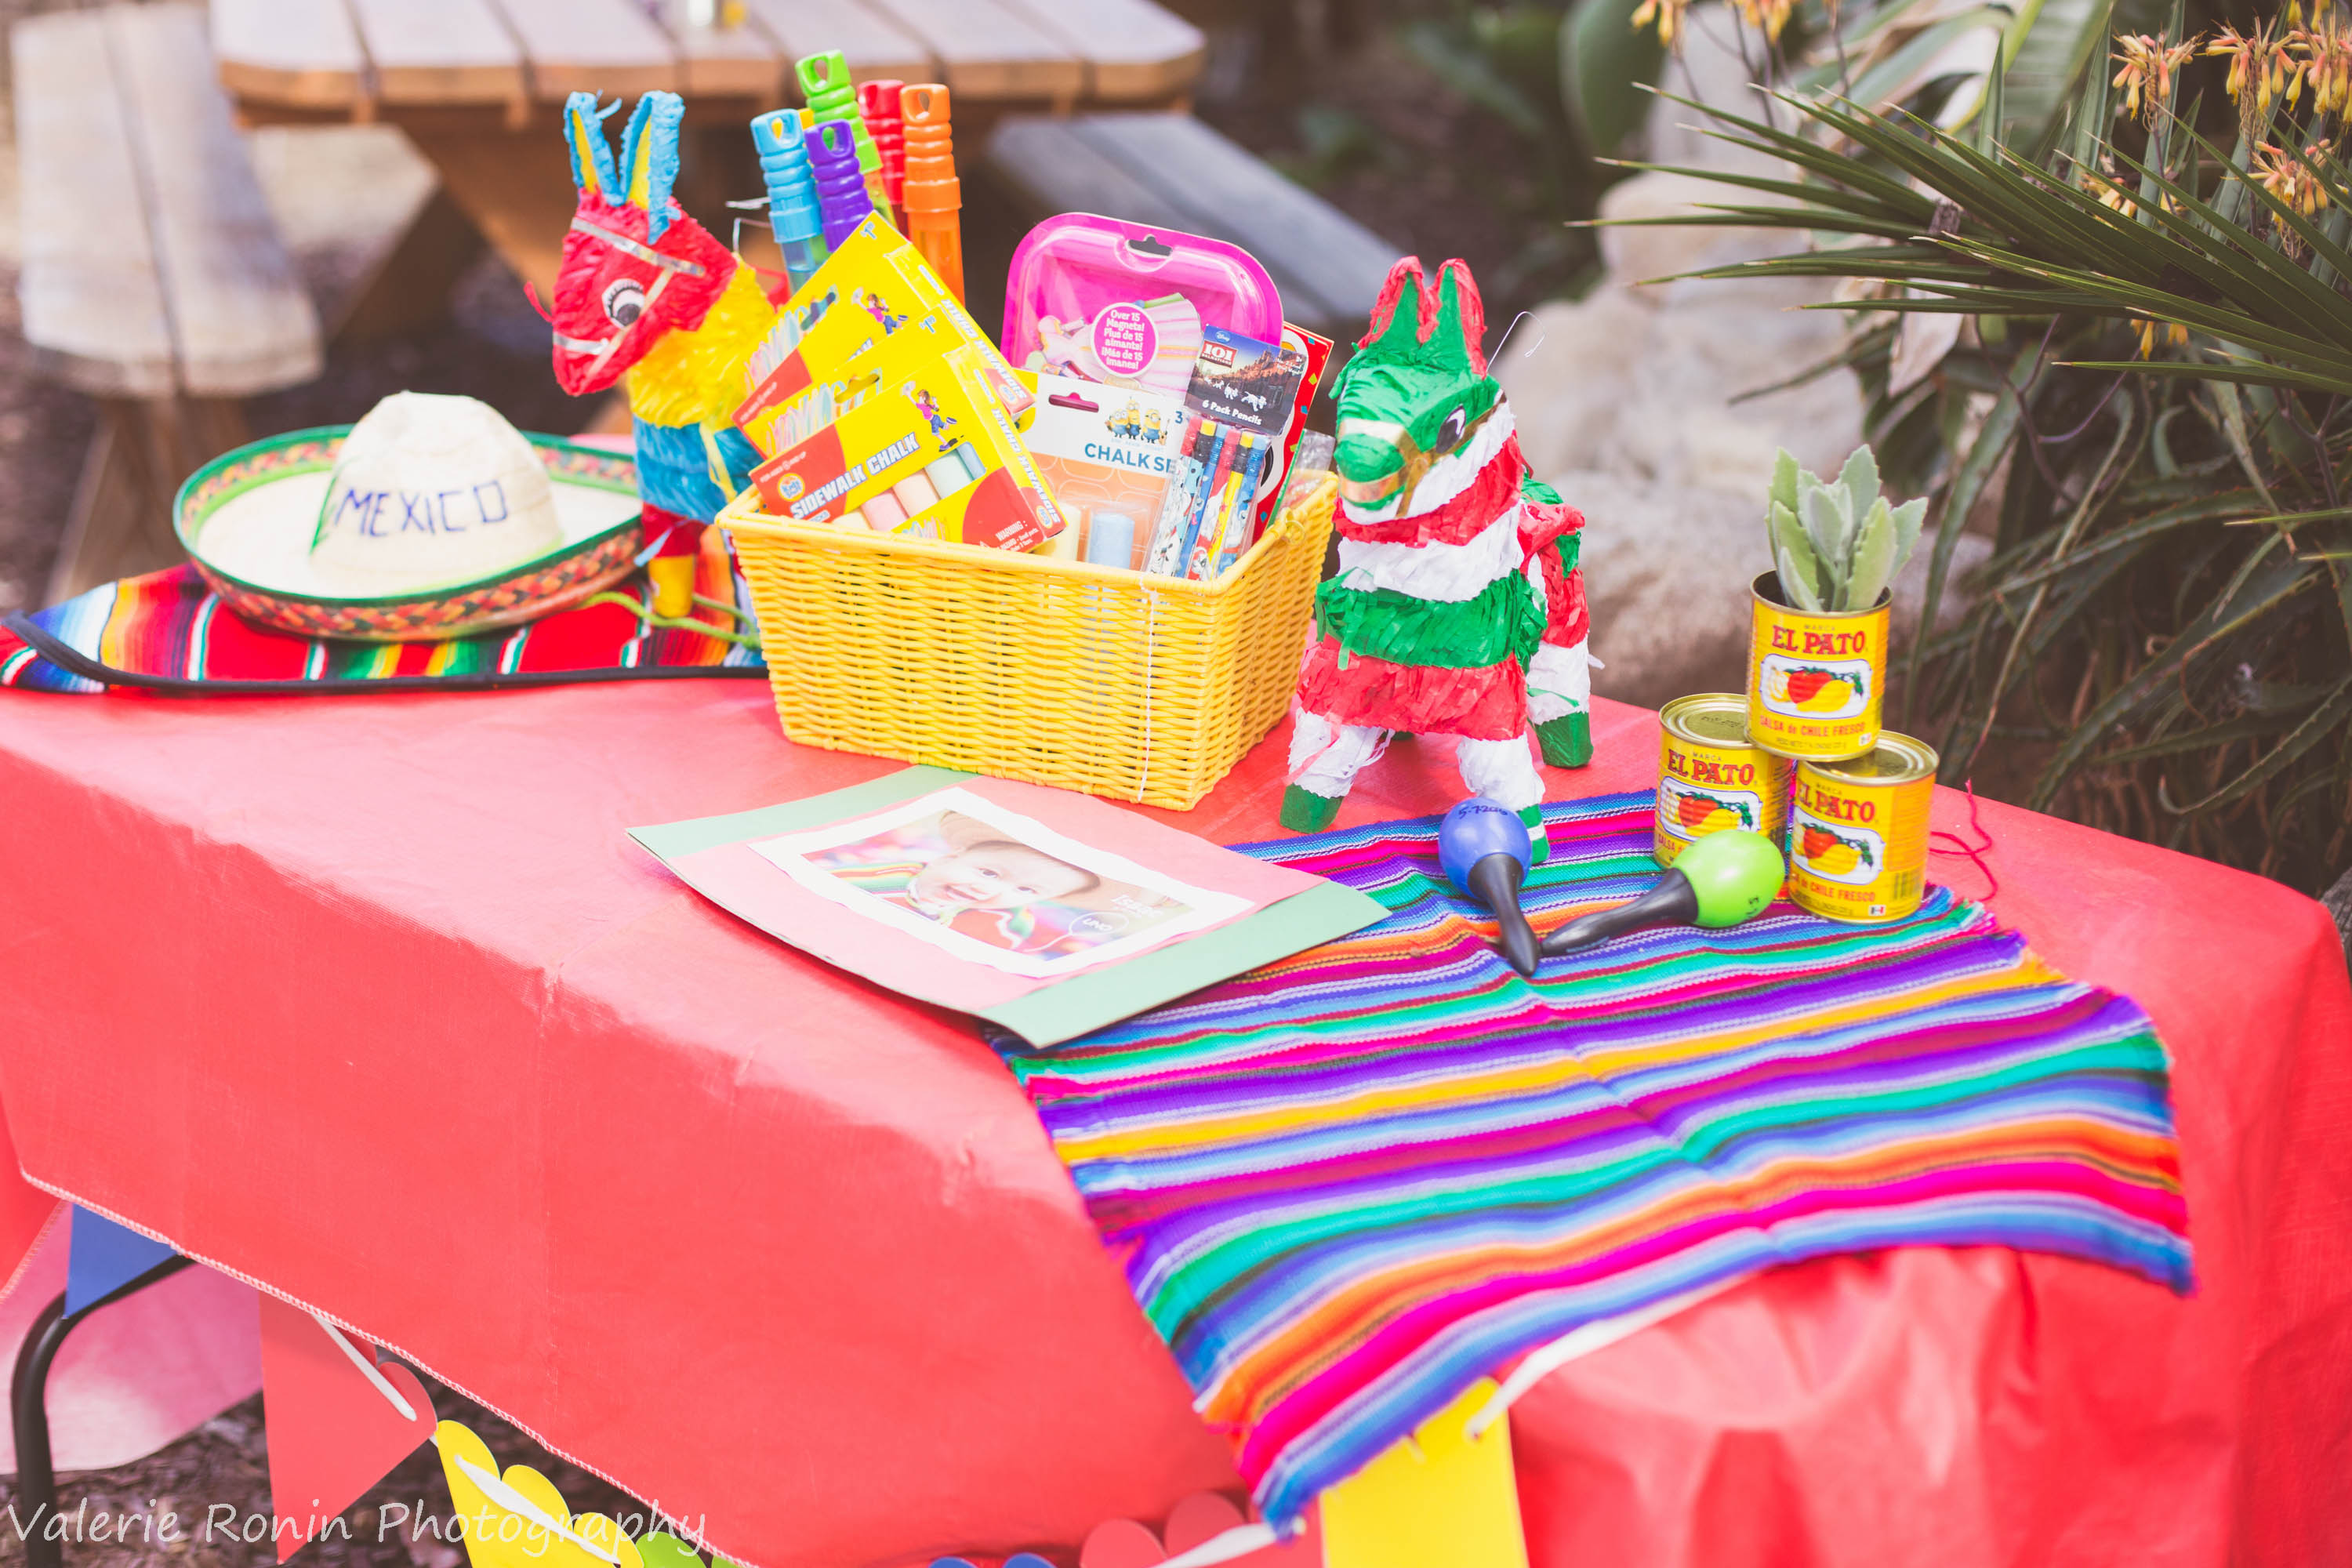 Mexican theme table  Mexican party theme, Mexican theme party decorations,  Quince themes